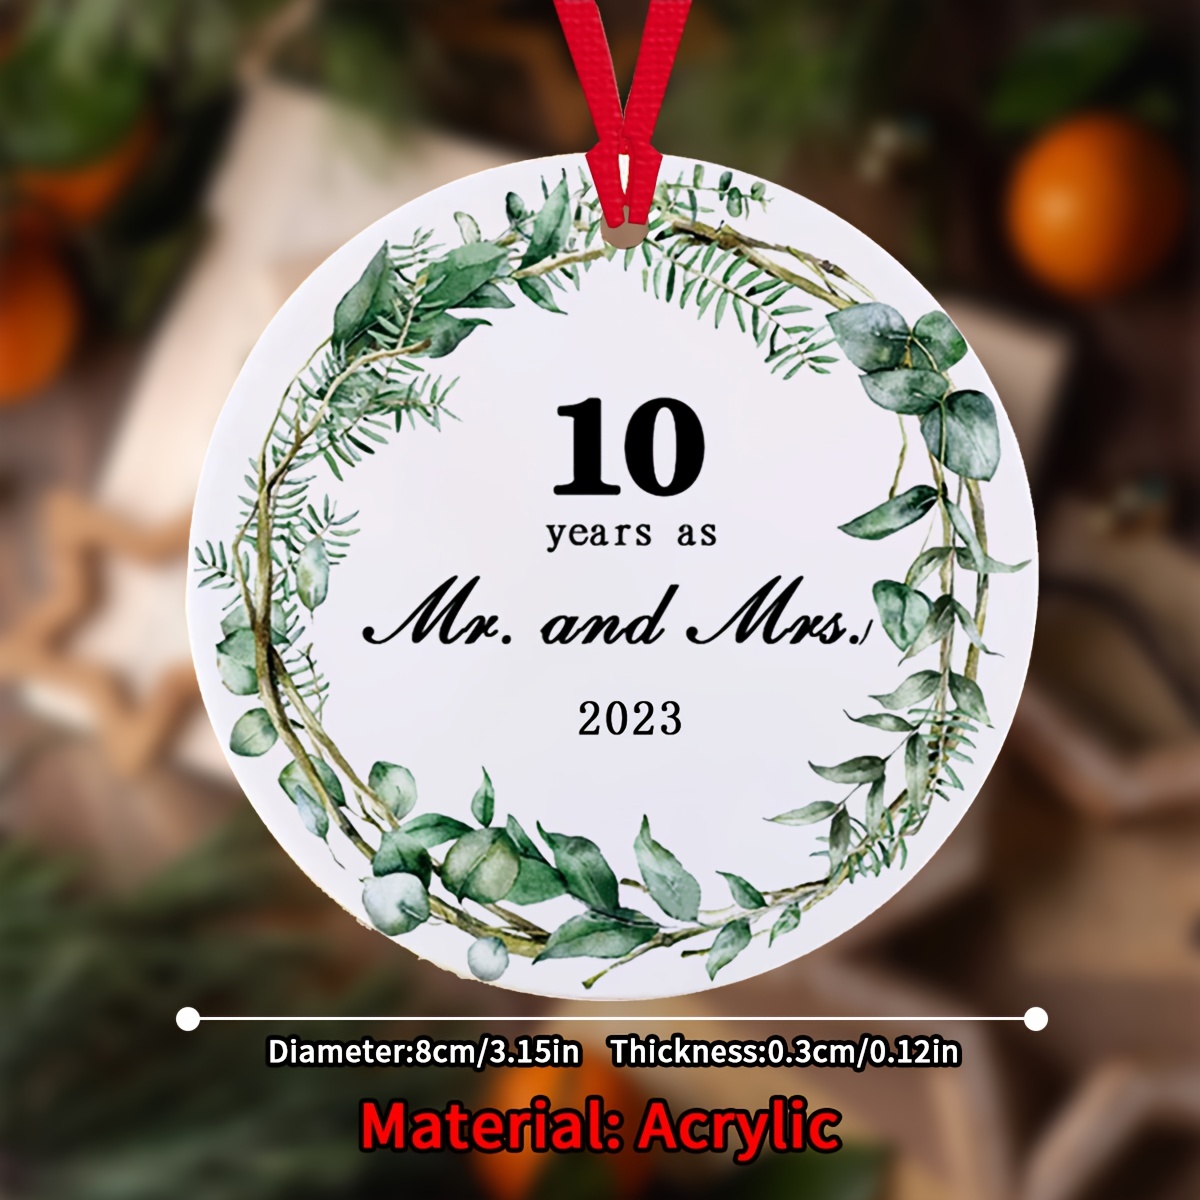  First Christmas Married Ornament 2023-1st Christmas as Mr and  Mrs Wedding Gifts, Newlywed Gifts, Bridal Shower Gifts for Couples, Bride  Gifts, Just Married Gifts - Couple Gifts - Acrylic Ornament 